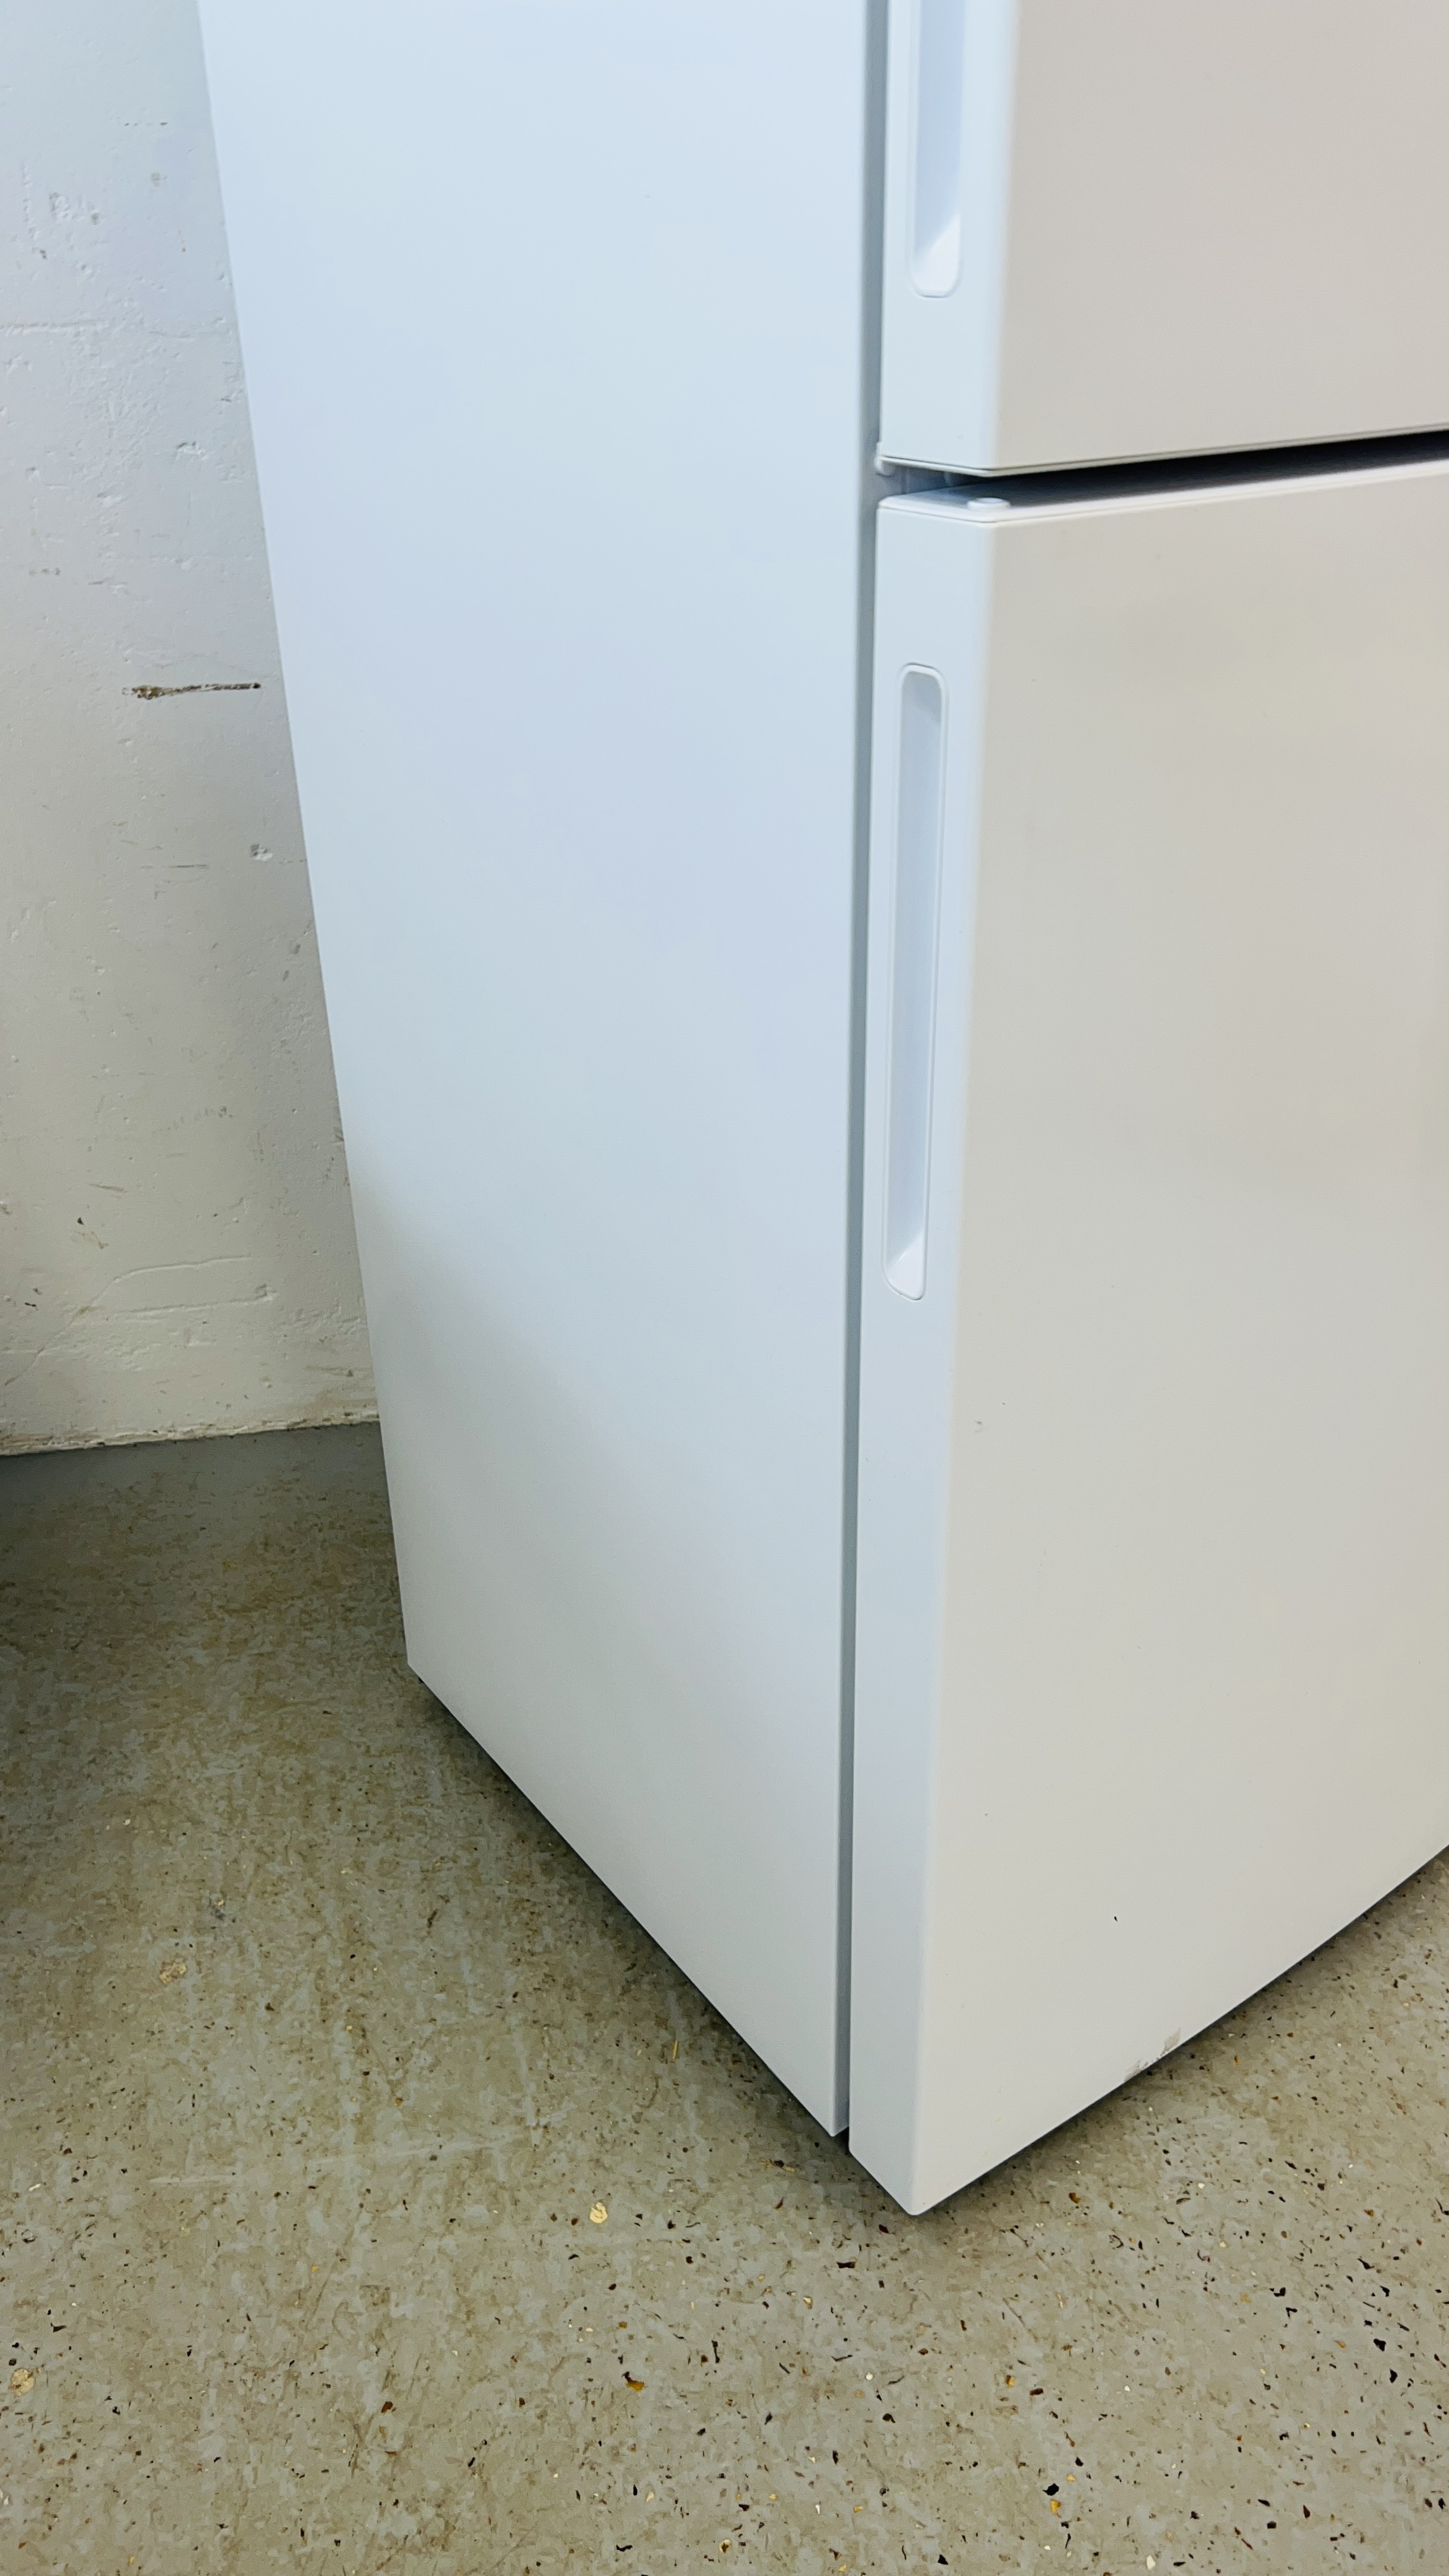 KENWOOD FROST FREE FRIDGE FREEZER WITH WATER DISPENSER - SOLD AS SEEN. - Image 4 of 11